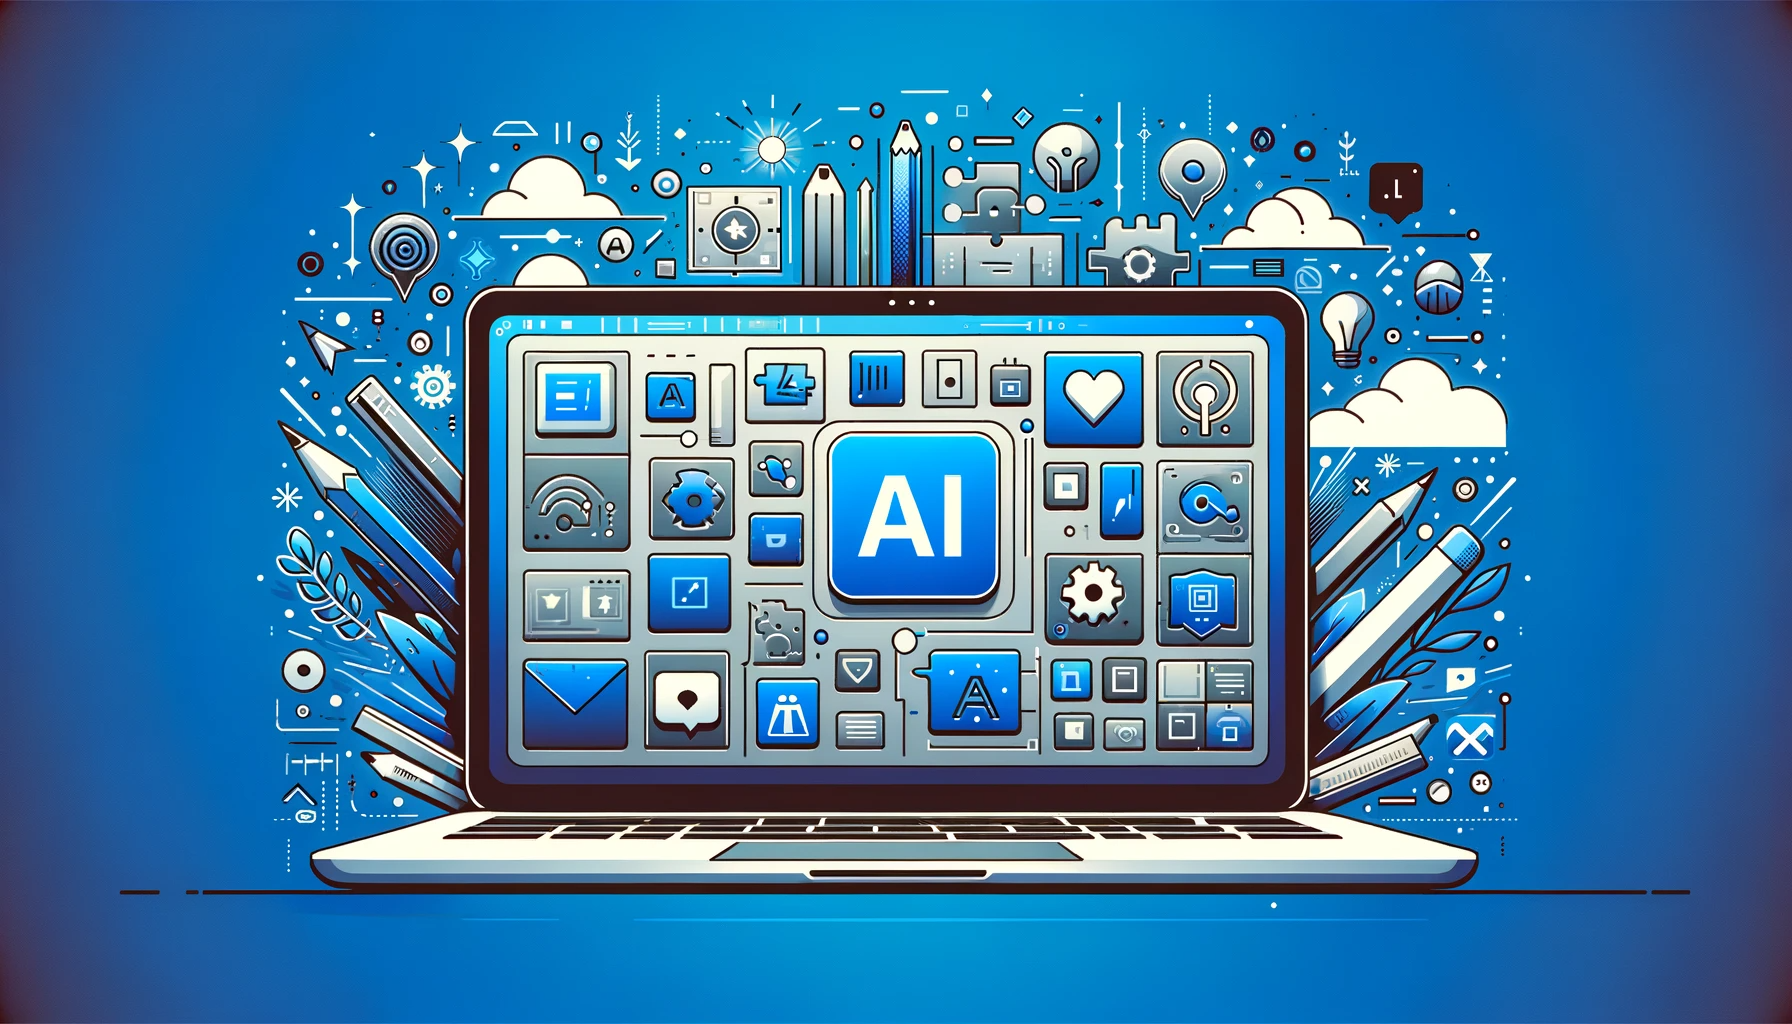 Laptop screen filled with various application icons, centered around an "AI" symbol, depicting the diverse and interconnected world of artificial intelligence technology.